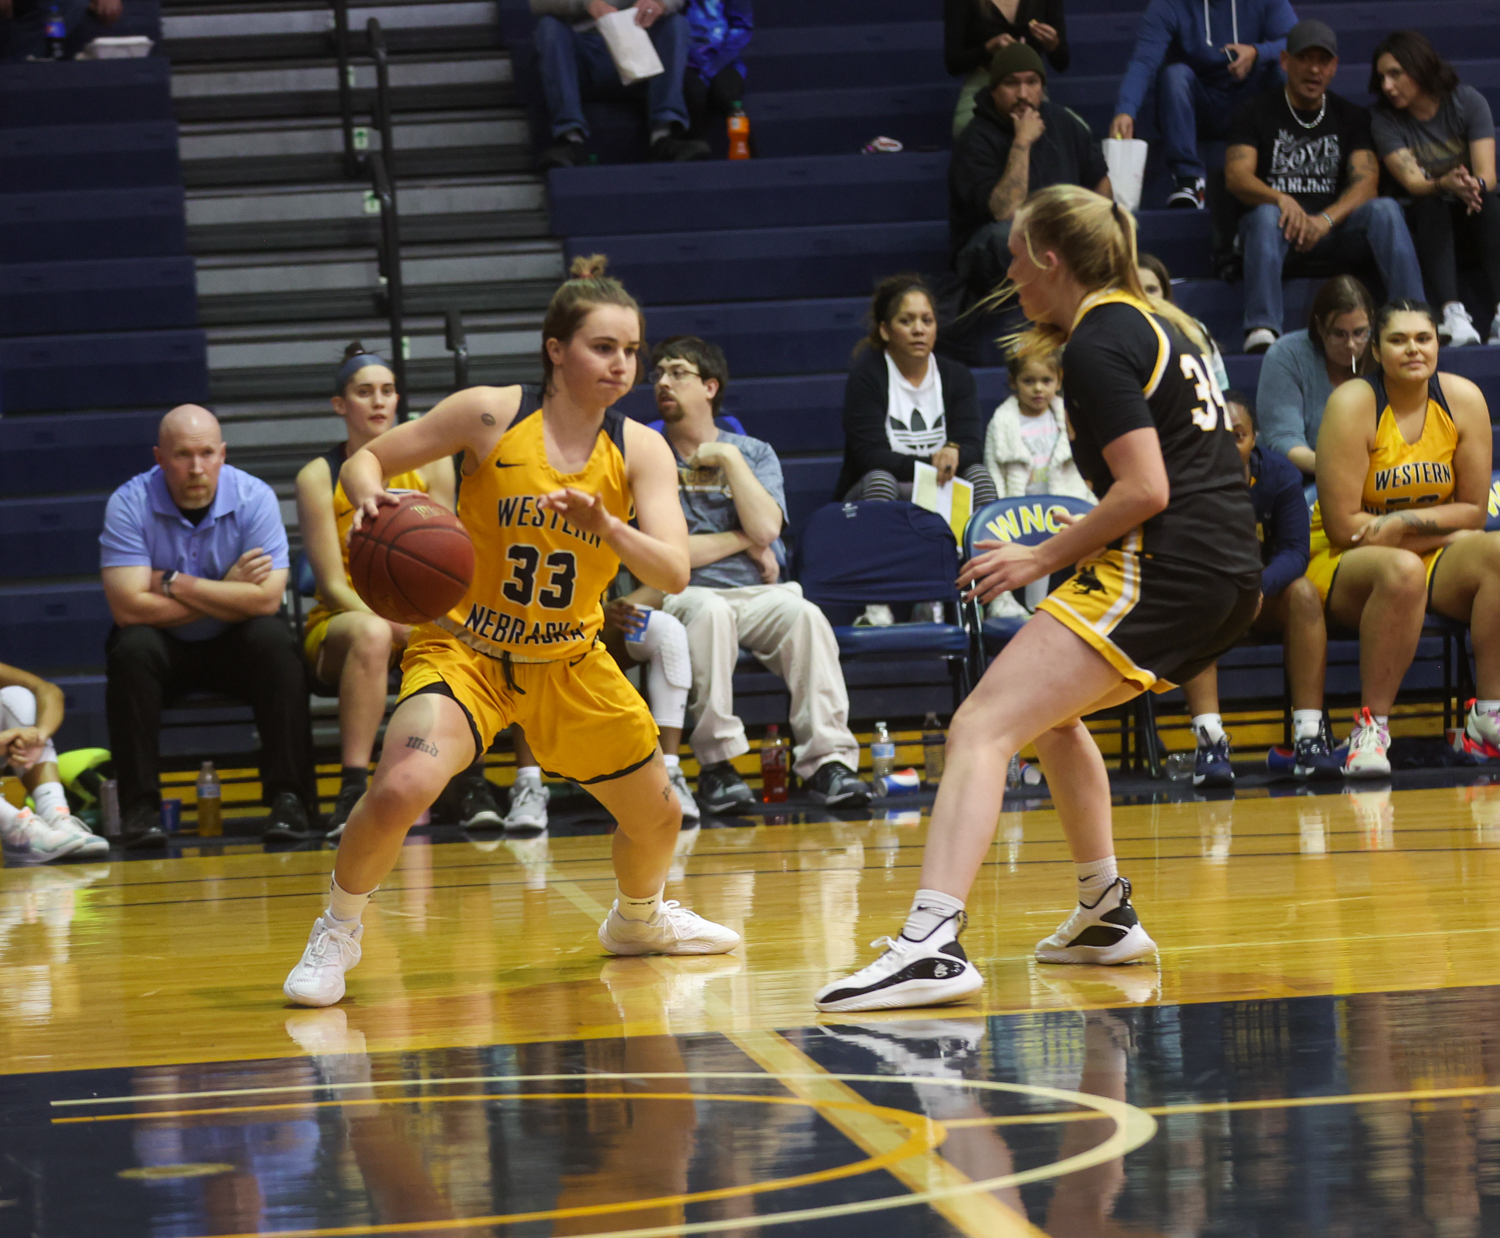 WNCC picks up 10th win of season with 101-28 victory over Miles